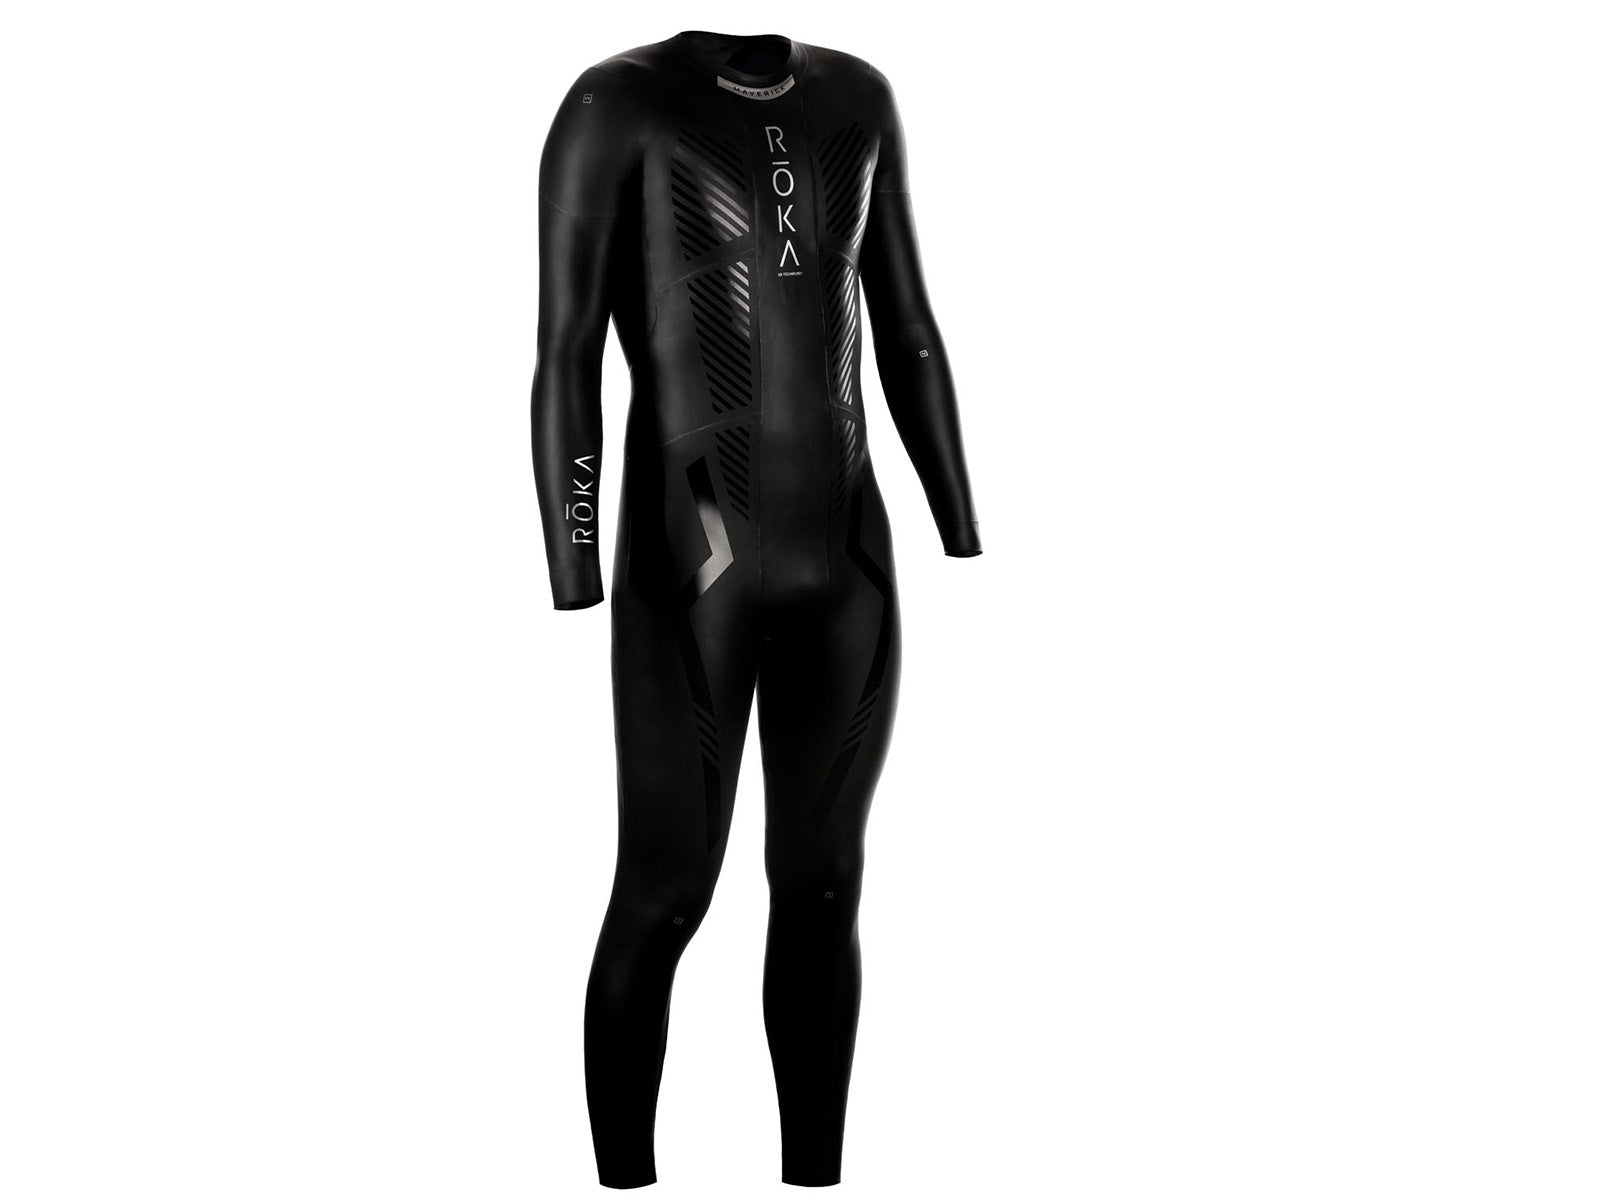 7 Tips for Putting a Wetsuit on More Easily